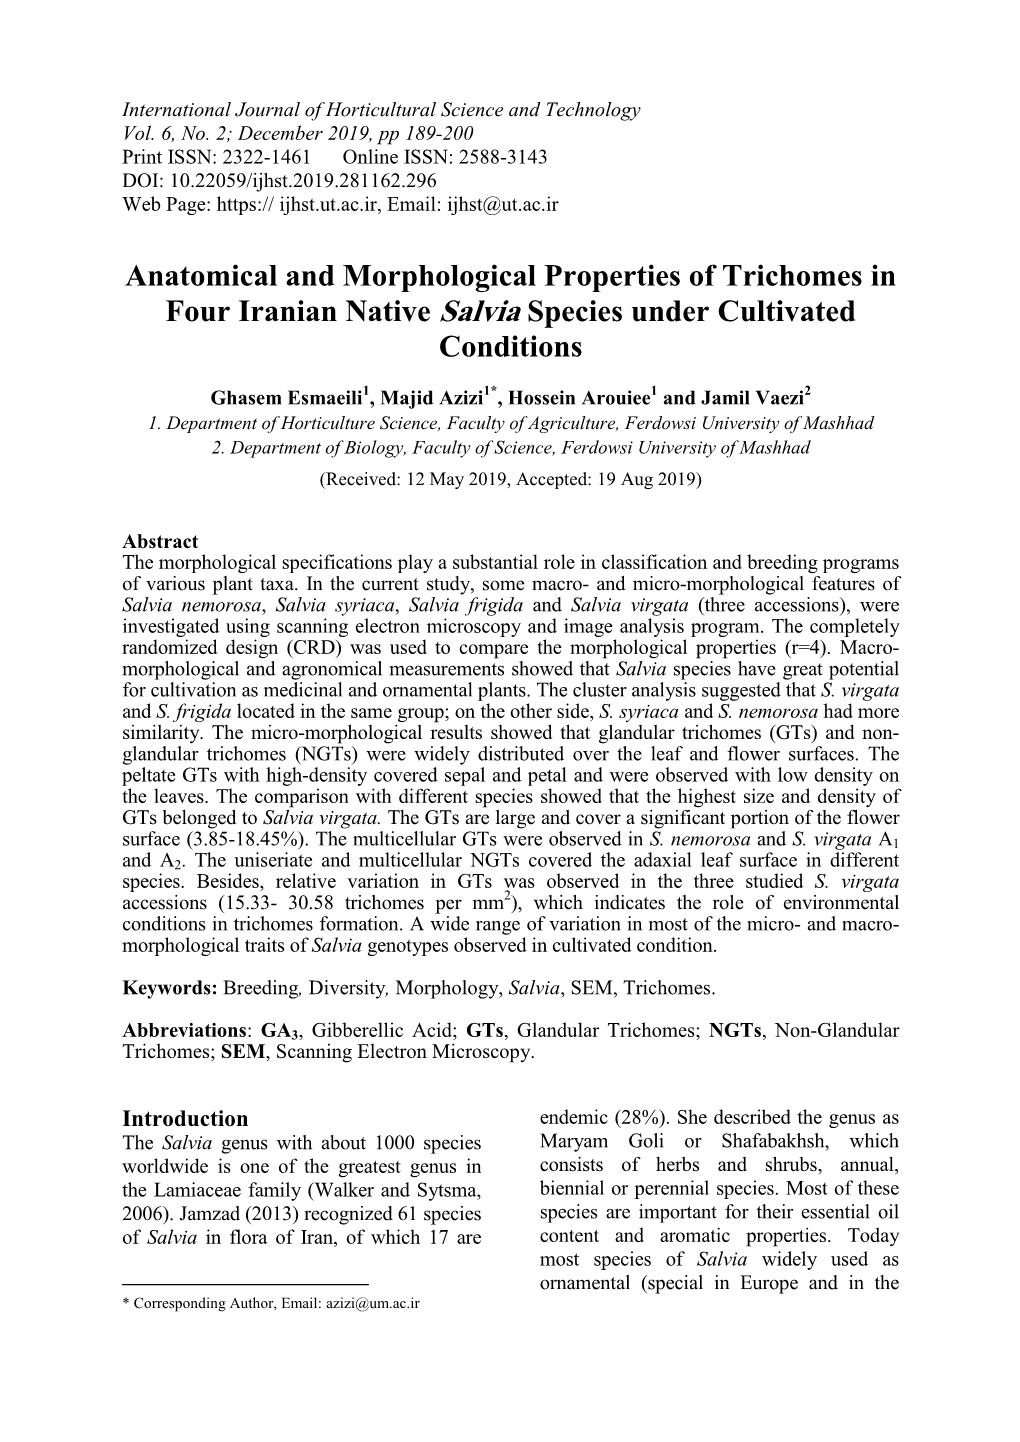 Anatomical and Morphological Properties of Trichomes in Four Iranian Native Salvia Species Under Cultivated Conditions